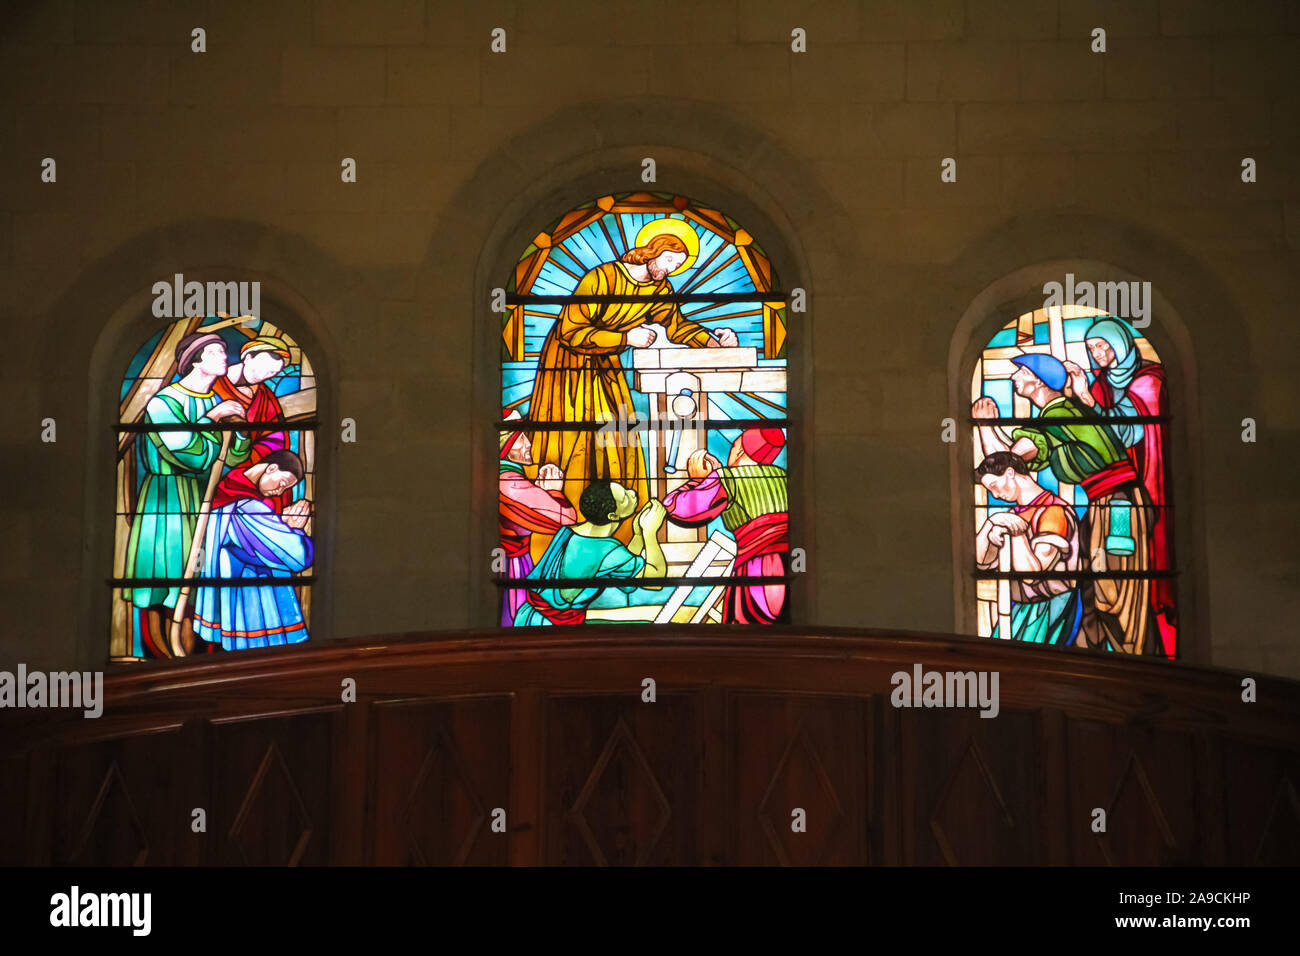 A stained glass window in the Catholic Church of the Annunciation. The largest Christian church building in the Middle East. Stock Photo